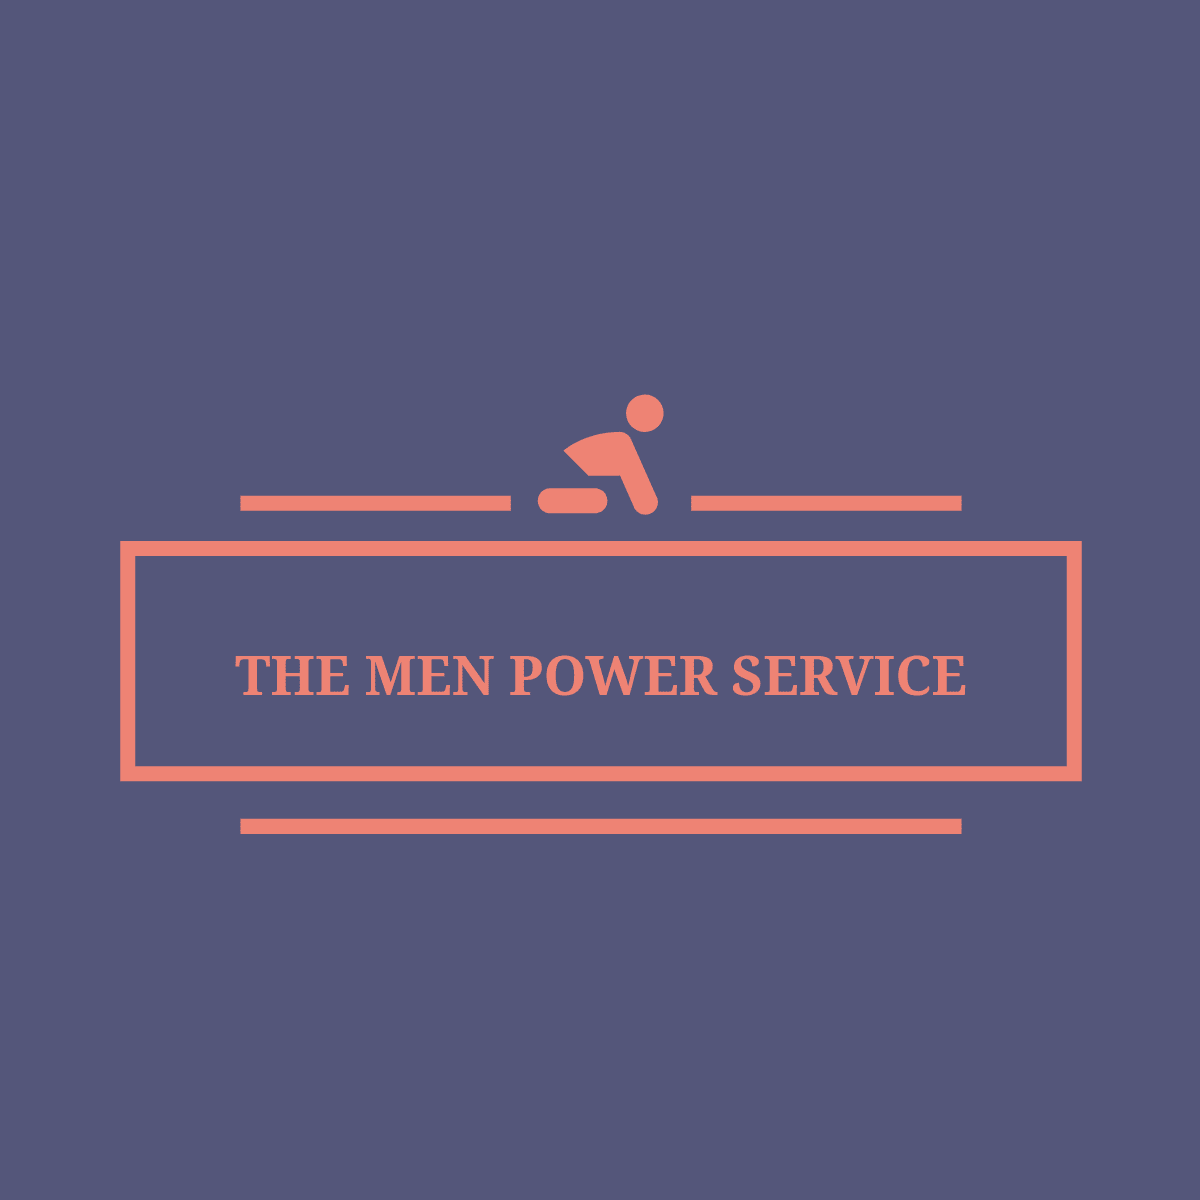 THE MAN POWER SERVICES